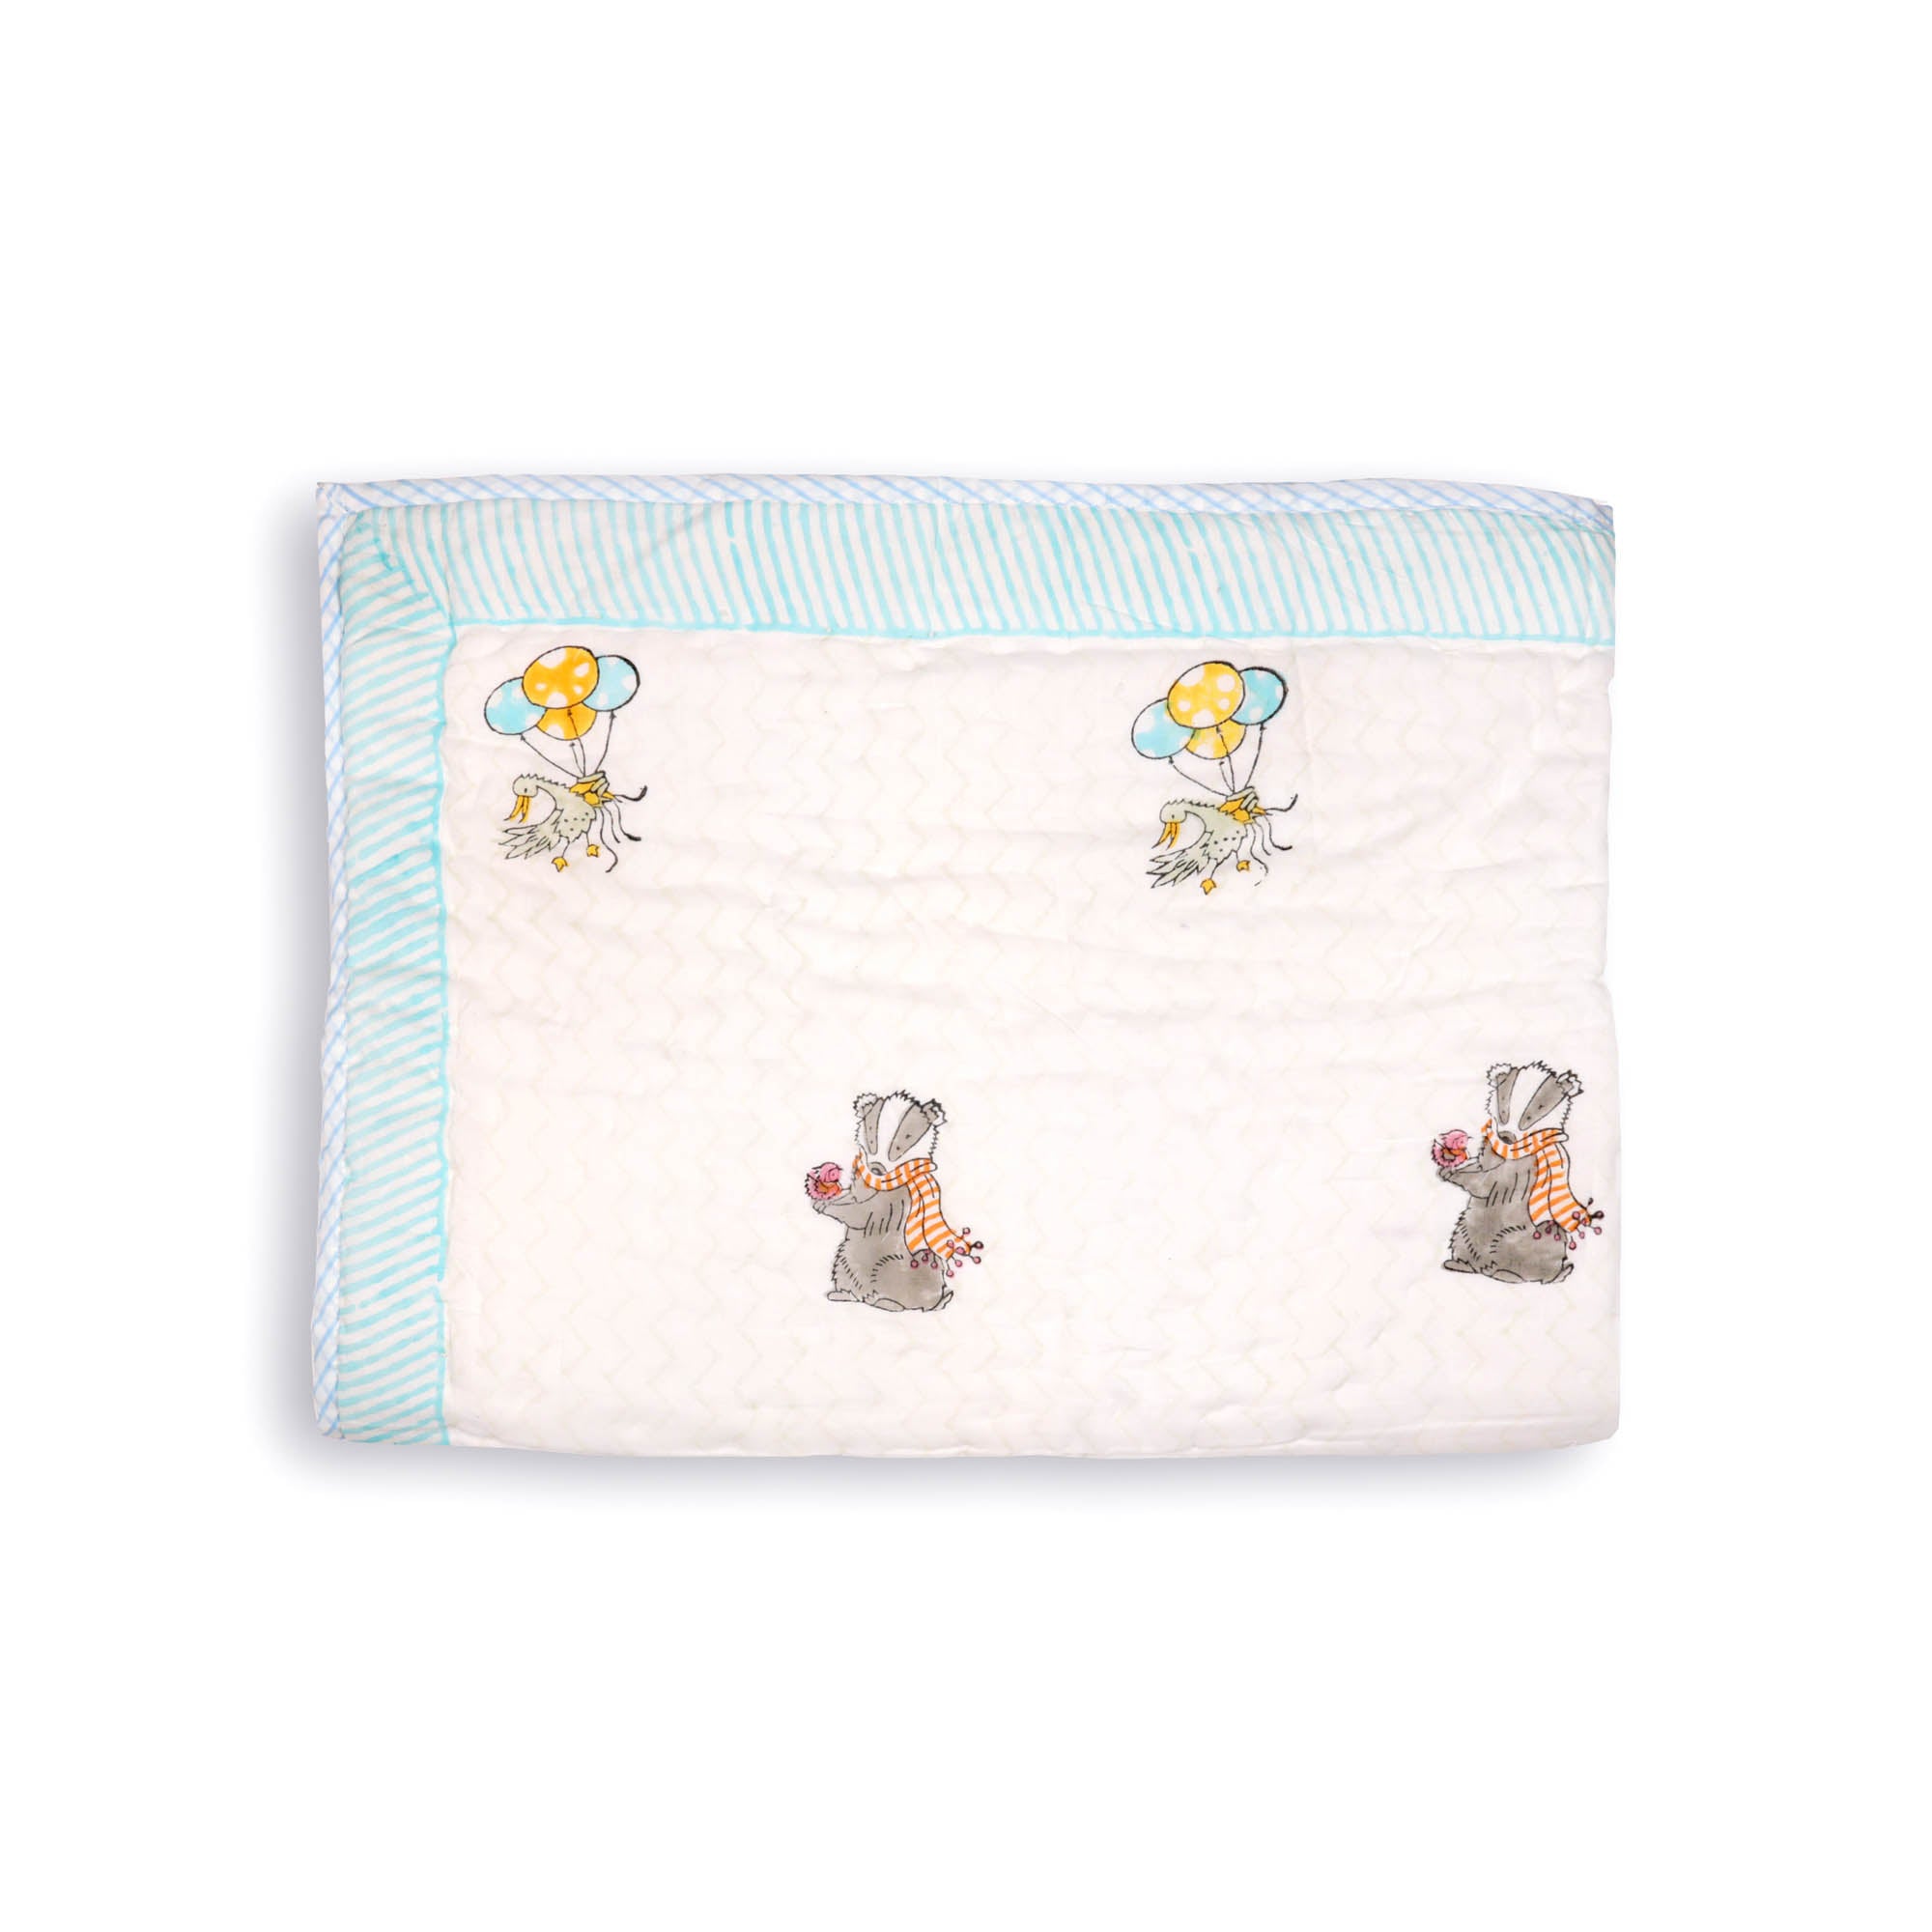 Kicks and Crawl - Bears & Ballons Quilted Thick Blanket